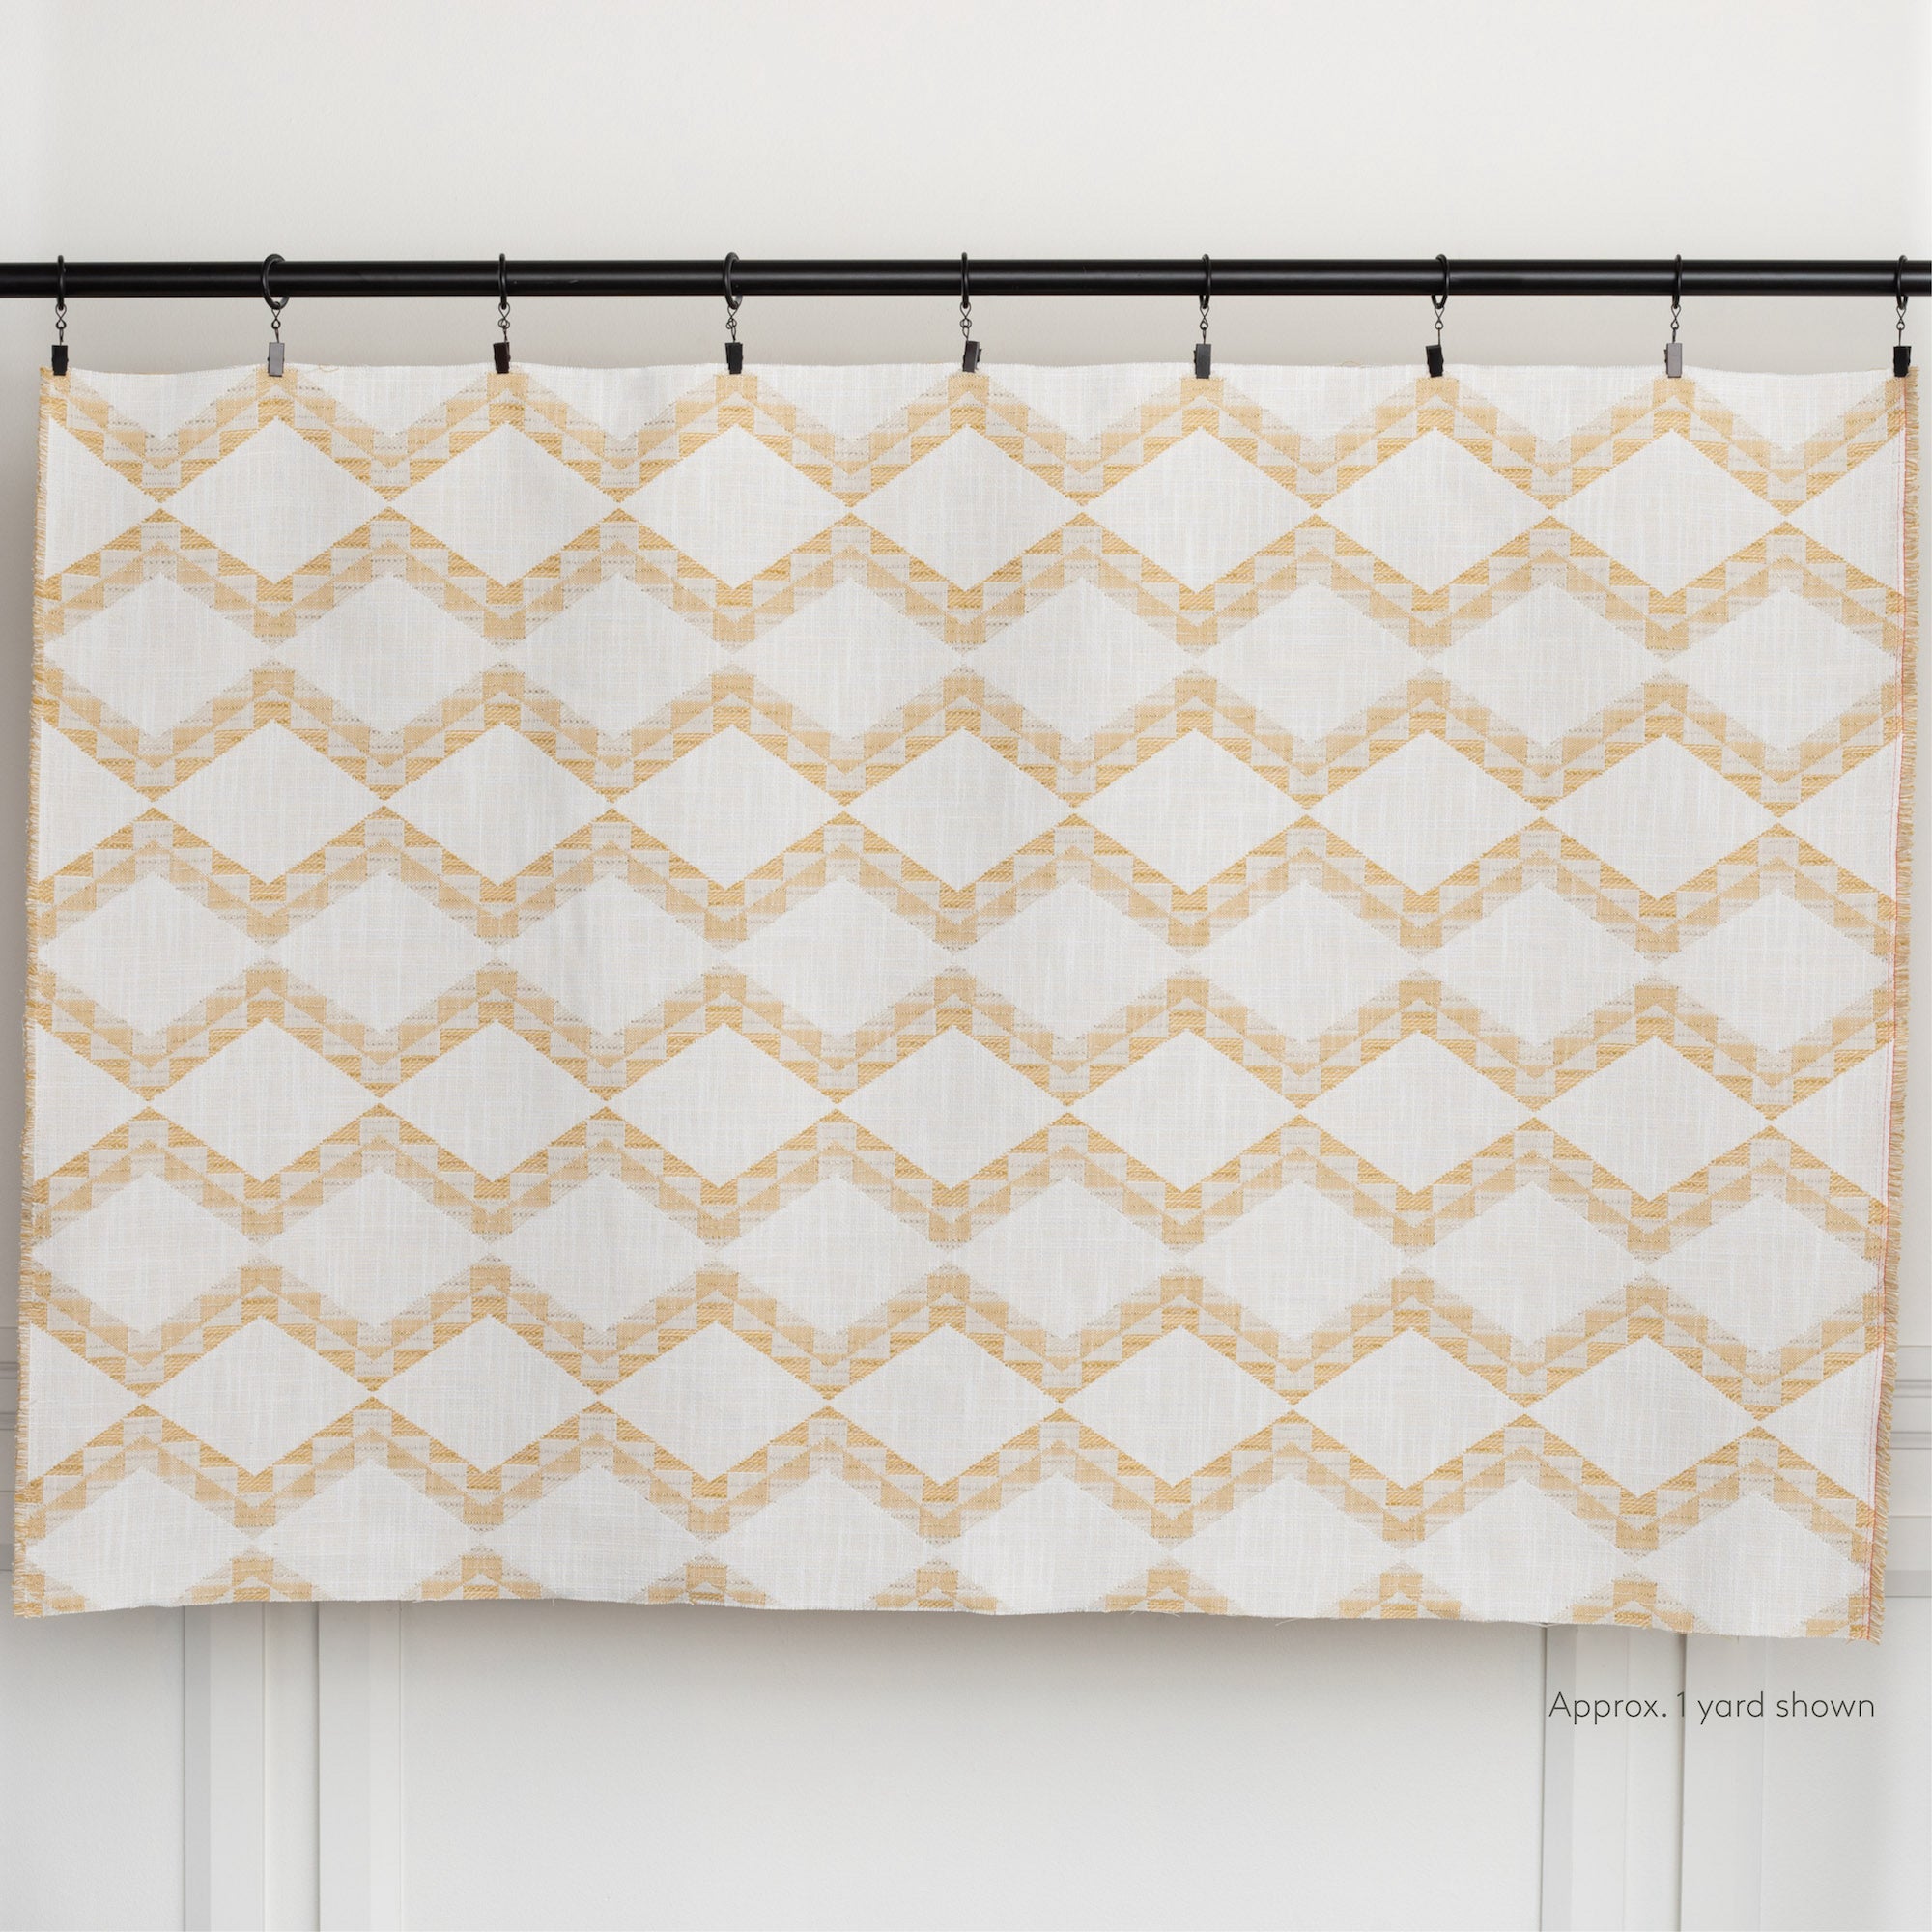 Estevan Amber yellow and cream large scale zigzag and diamond pattern indoor outdoor fabric : 1 yard cut